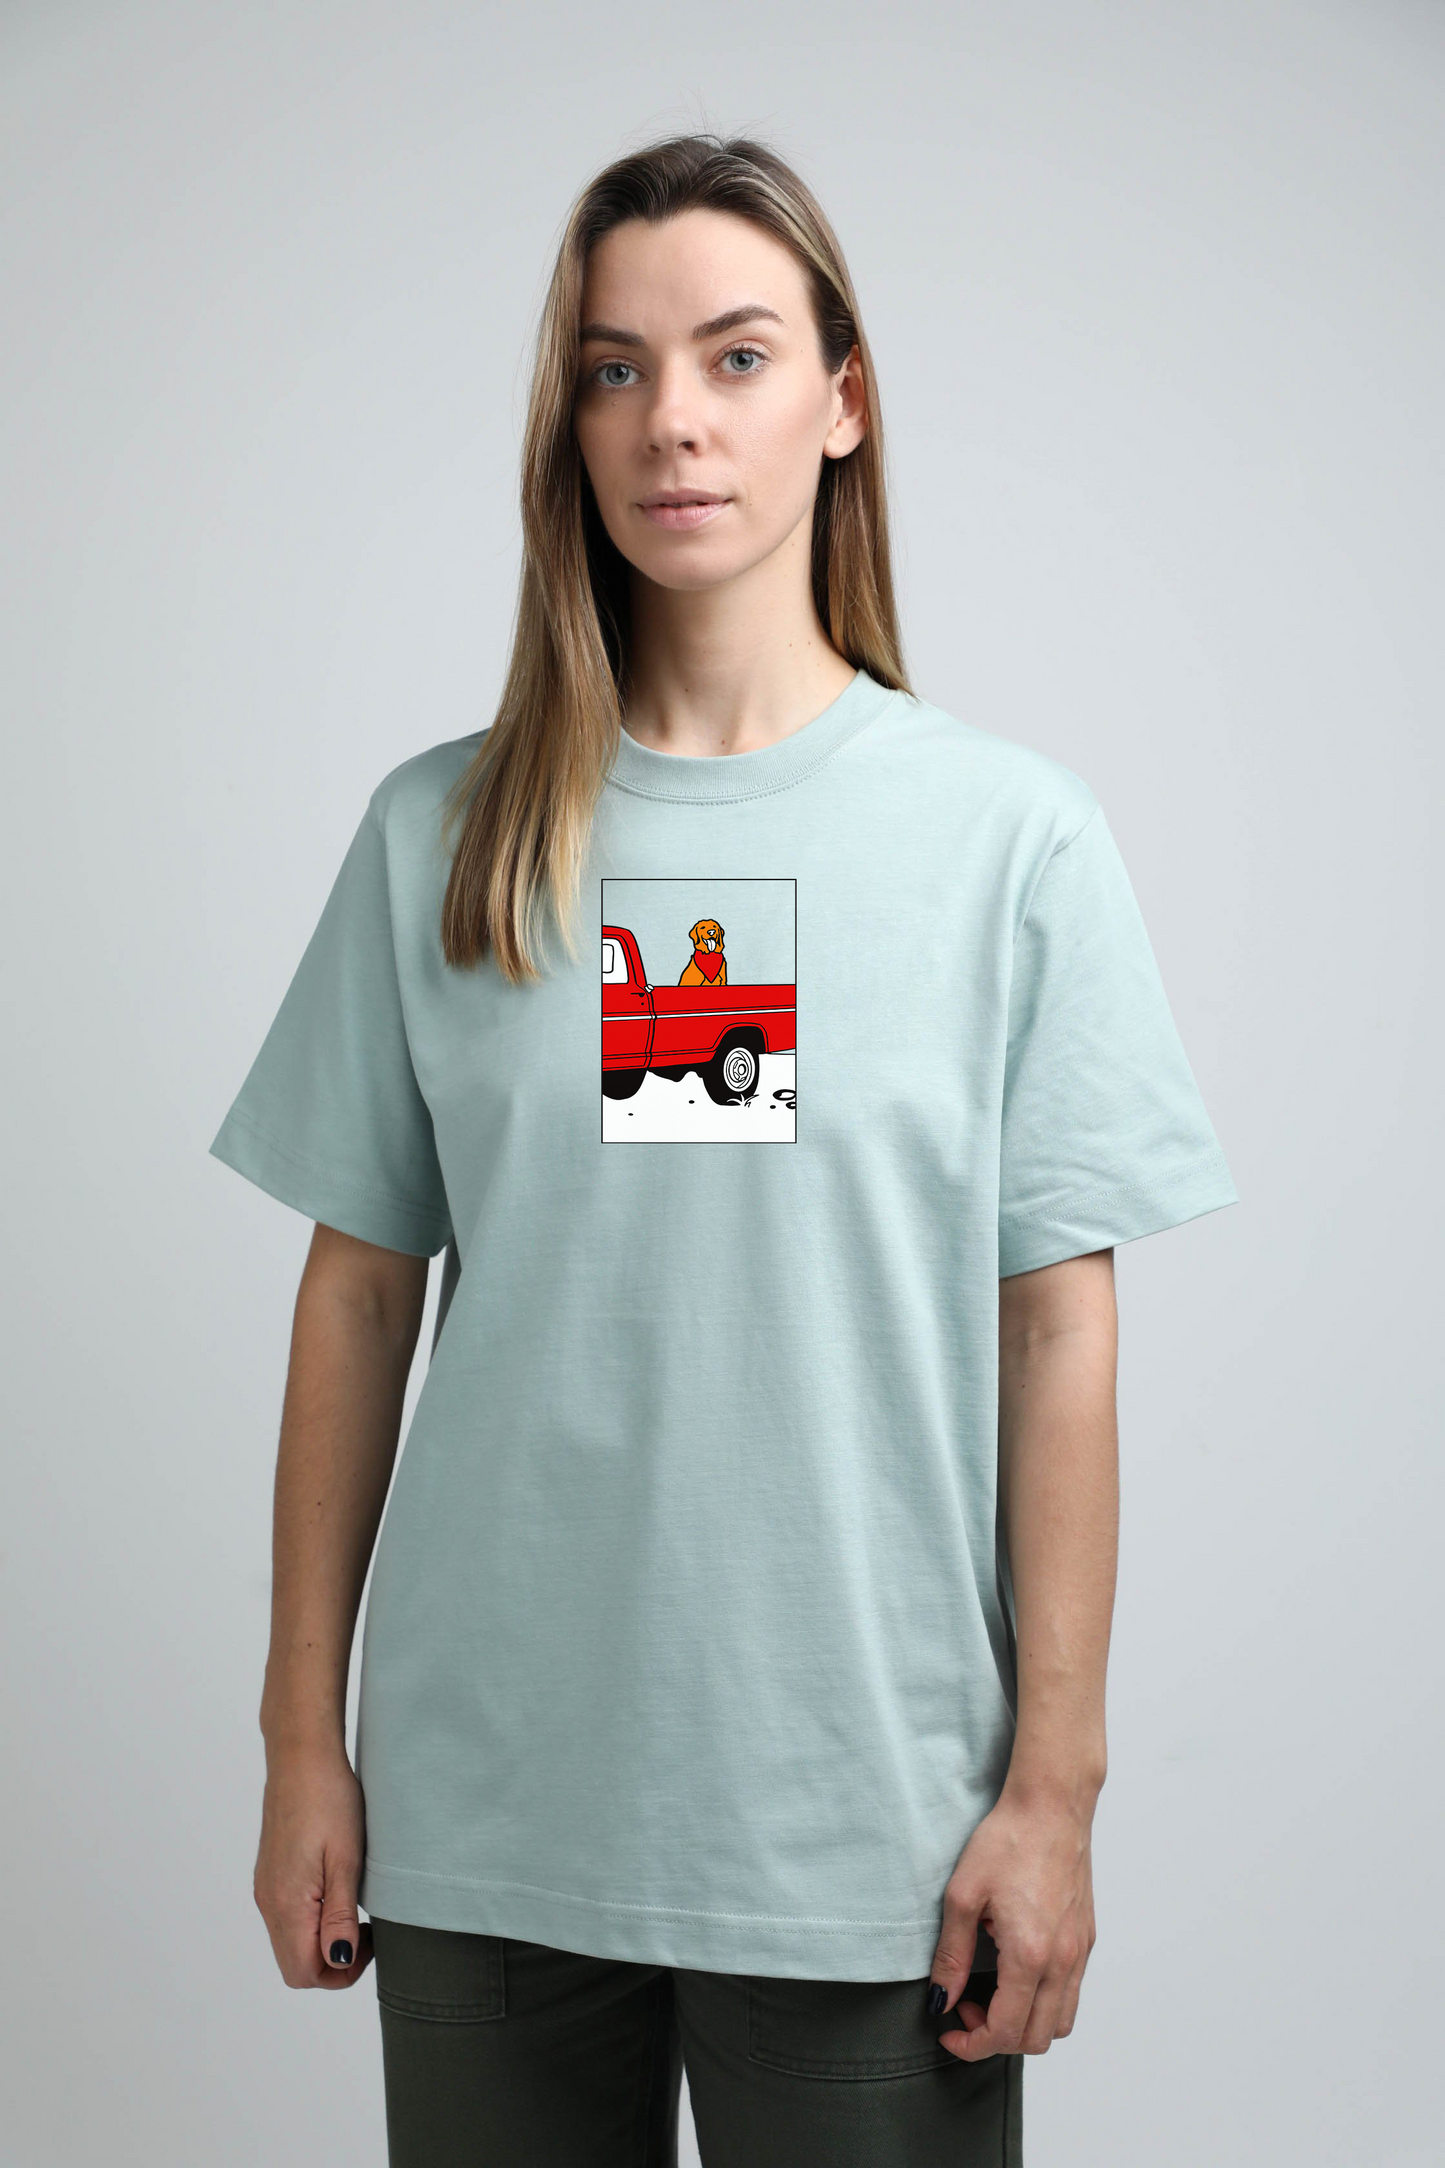 Pickup truck dog | Heavyweight T-Shirt with dog. Oversized | Unisex by My Wild Other